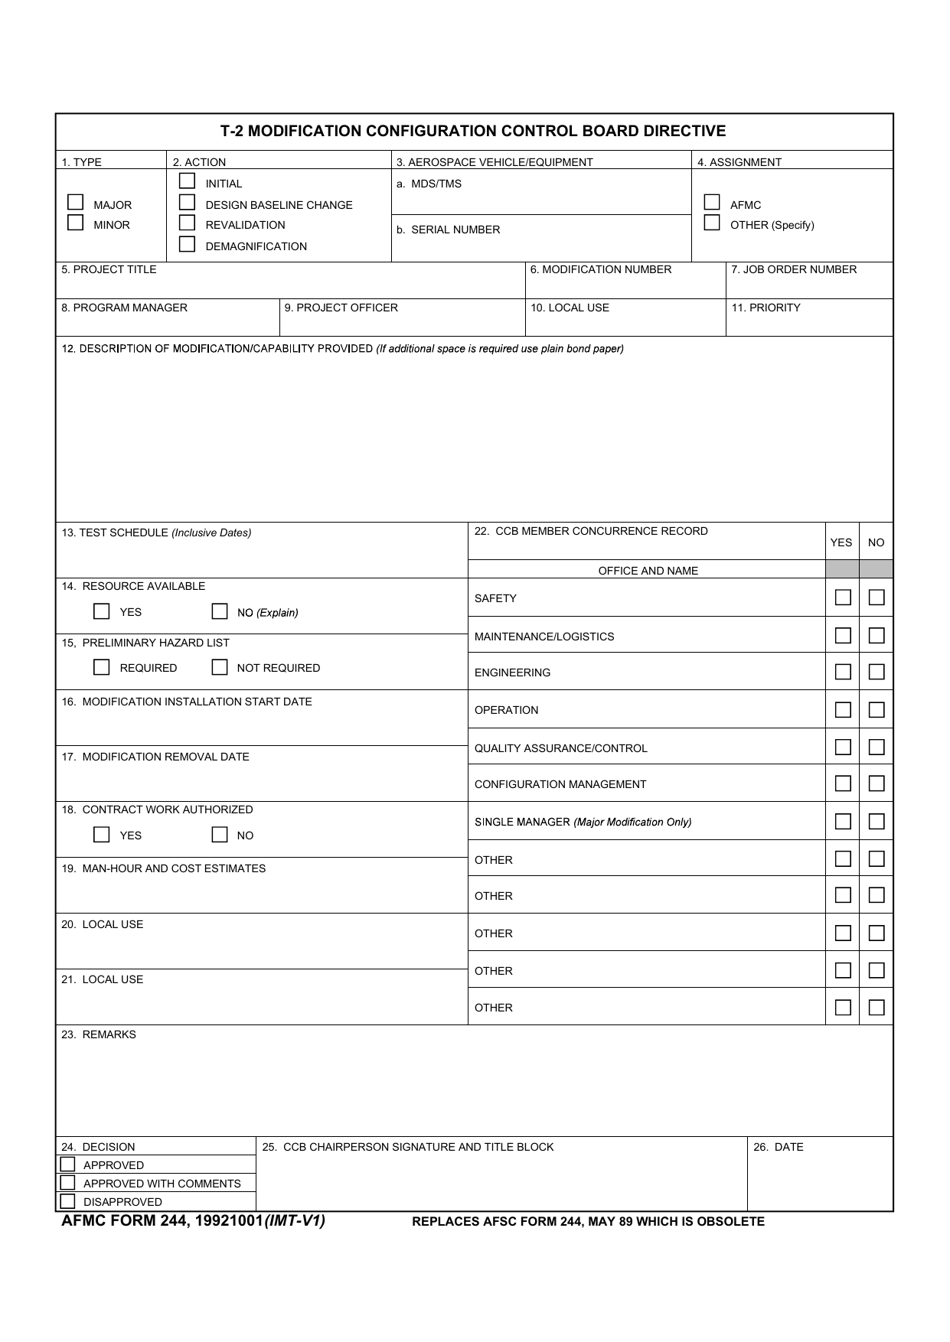 AFMC Form 244 T-2 Modification Configuration Control Board Directive, Page 1